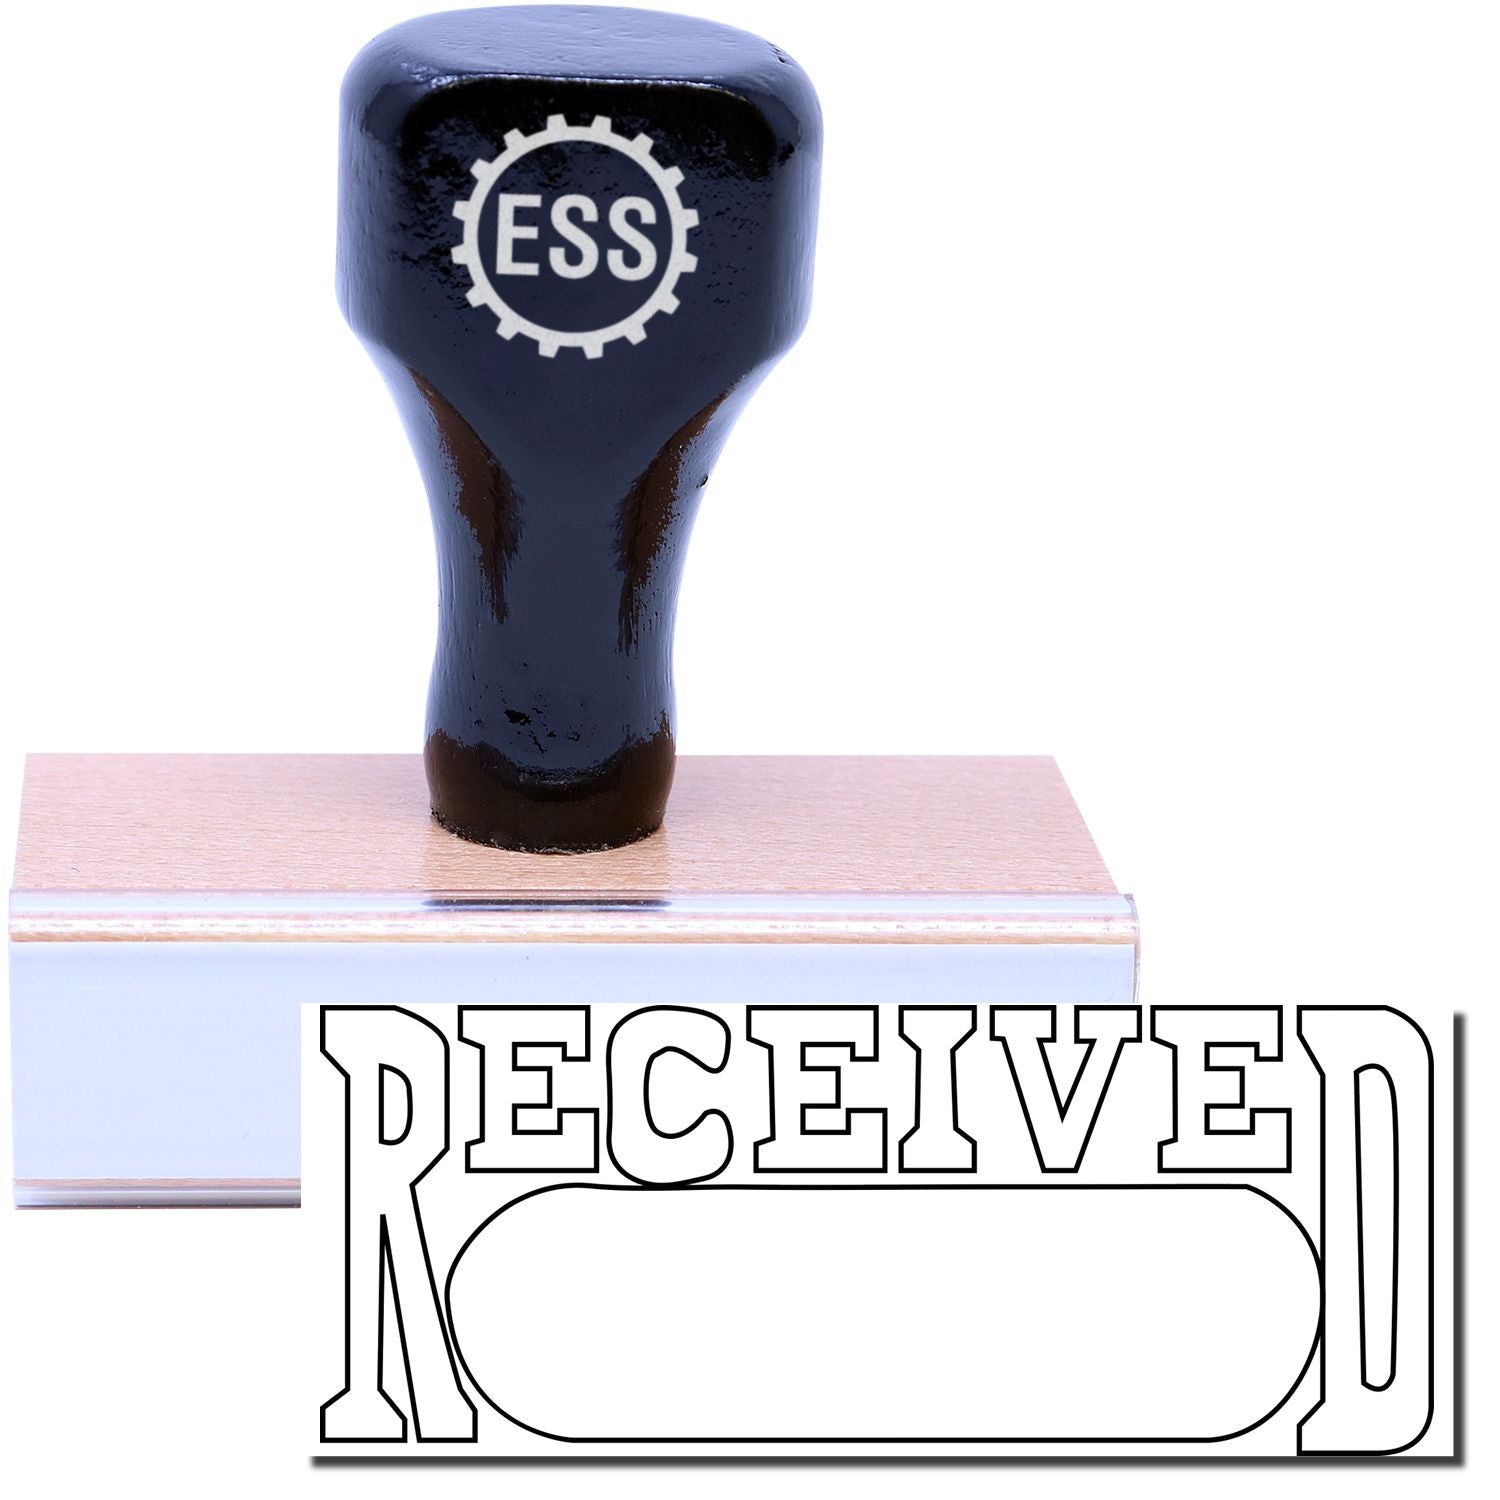 A stock office rubber stamp with a stamped image showing how the text "RECEIVED" in a large outline font with a date box is displayed after stamping.